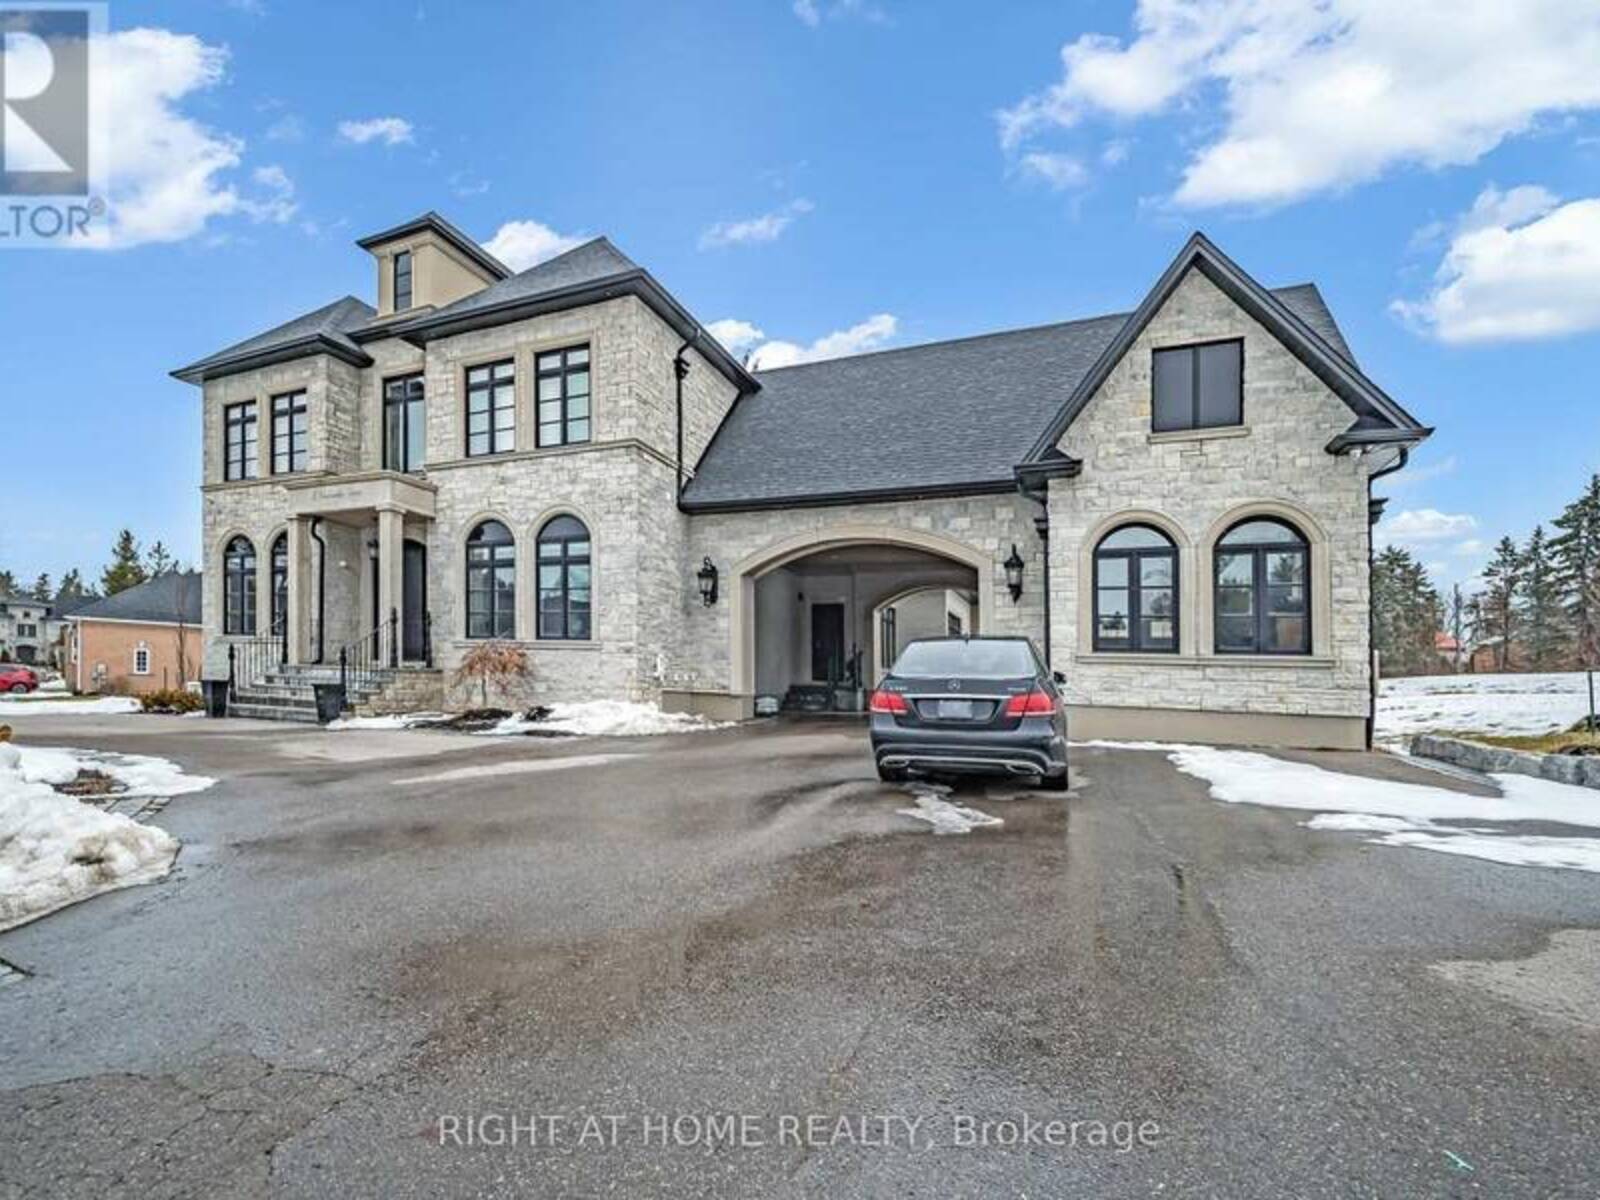 3 VANVALLEY DR, Whitchurch-Stouffville, Ontario L4A 2E1